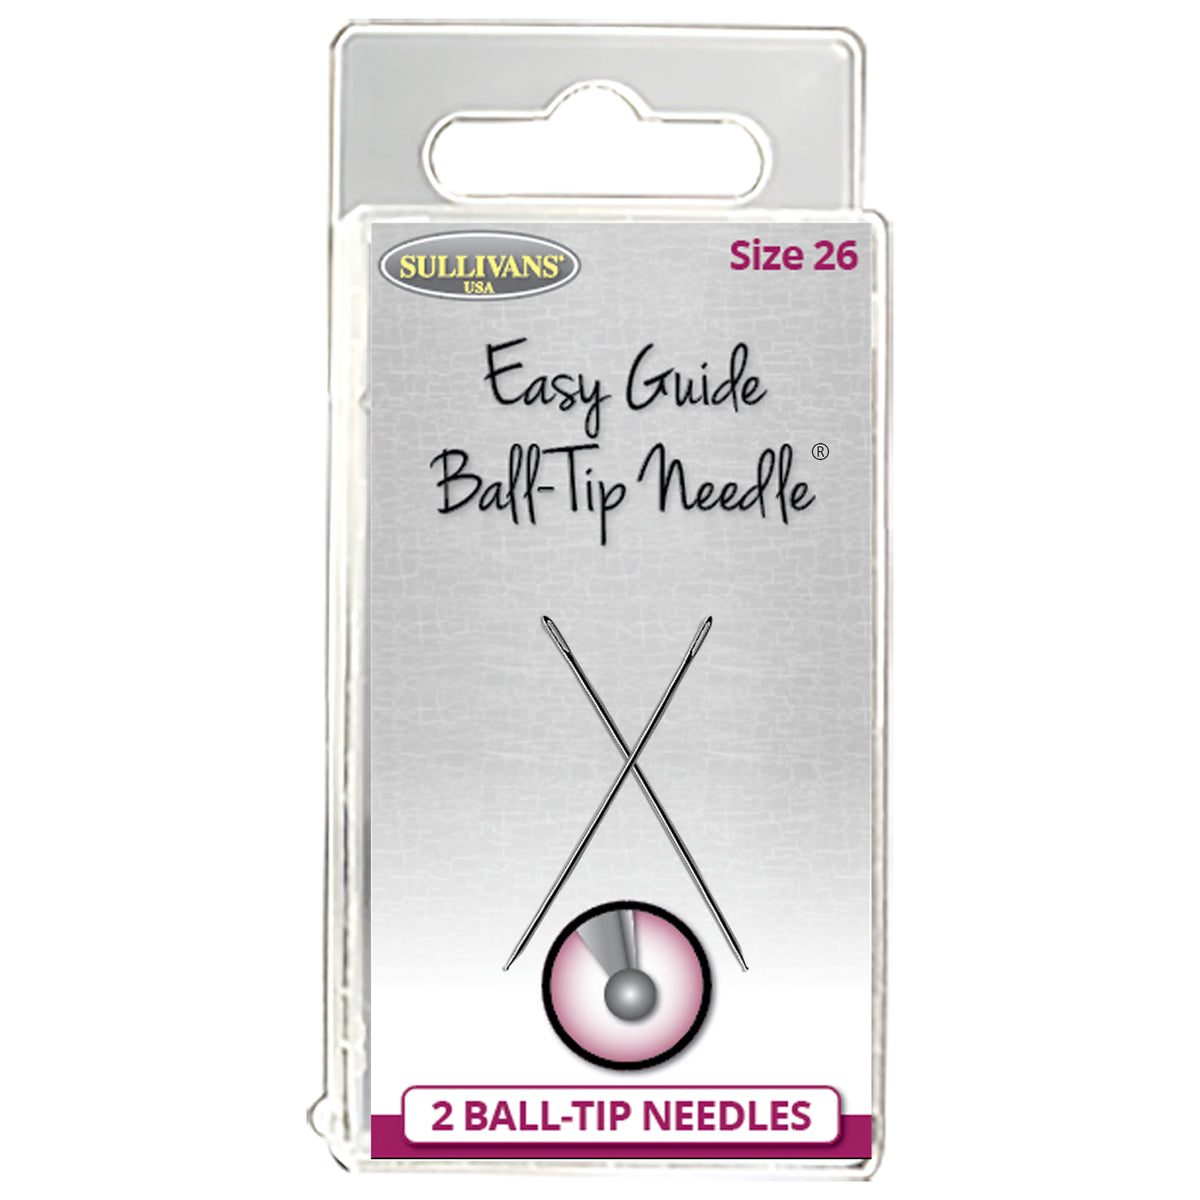 Easy Guide Ball-Tip Needles for Cross Stitch